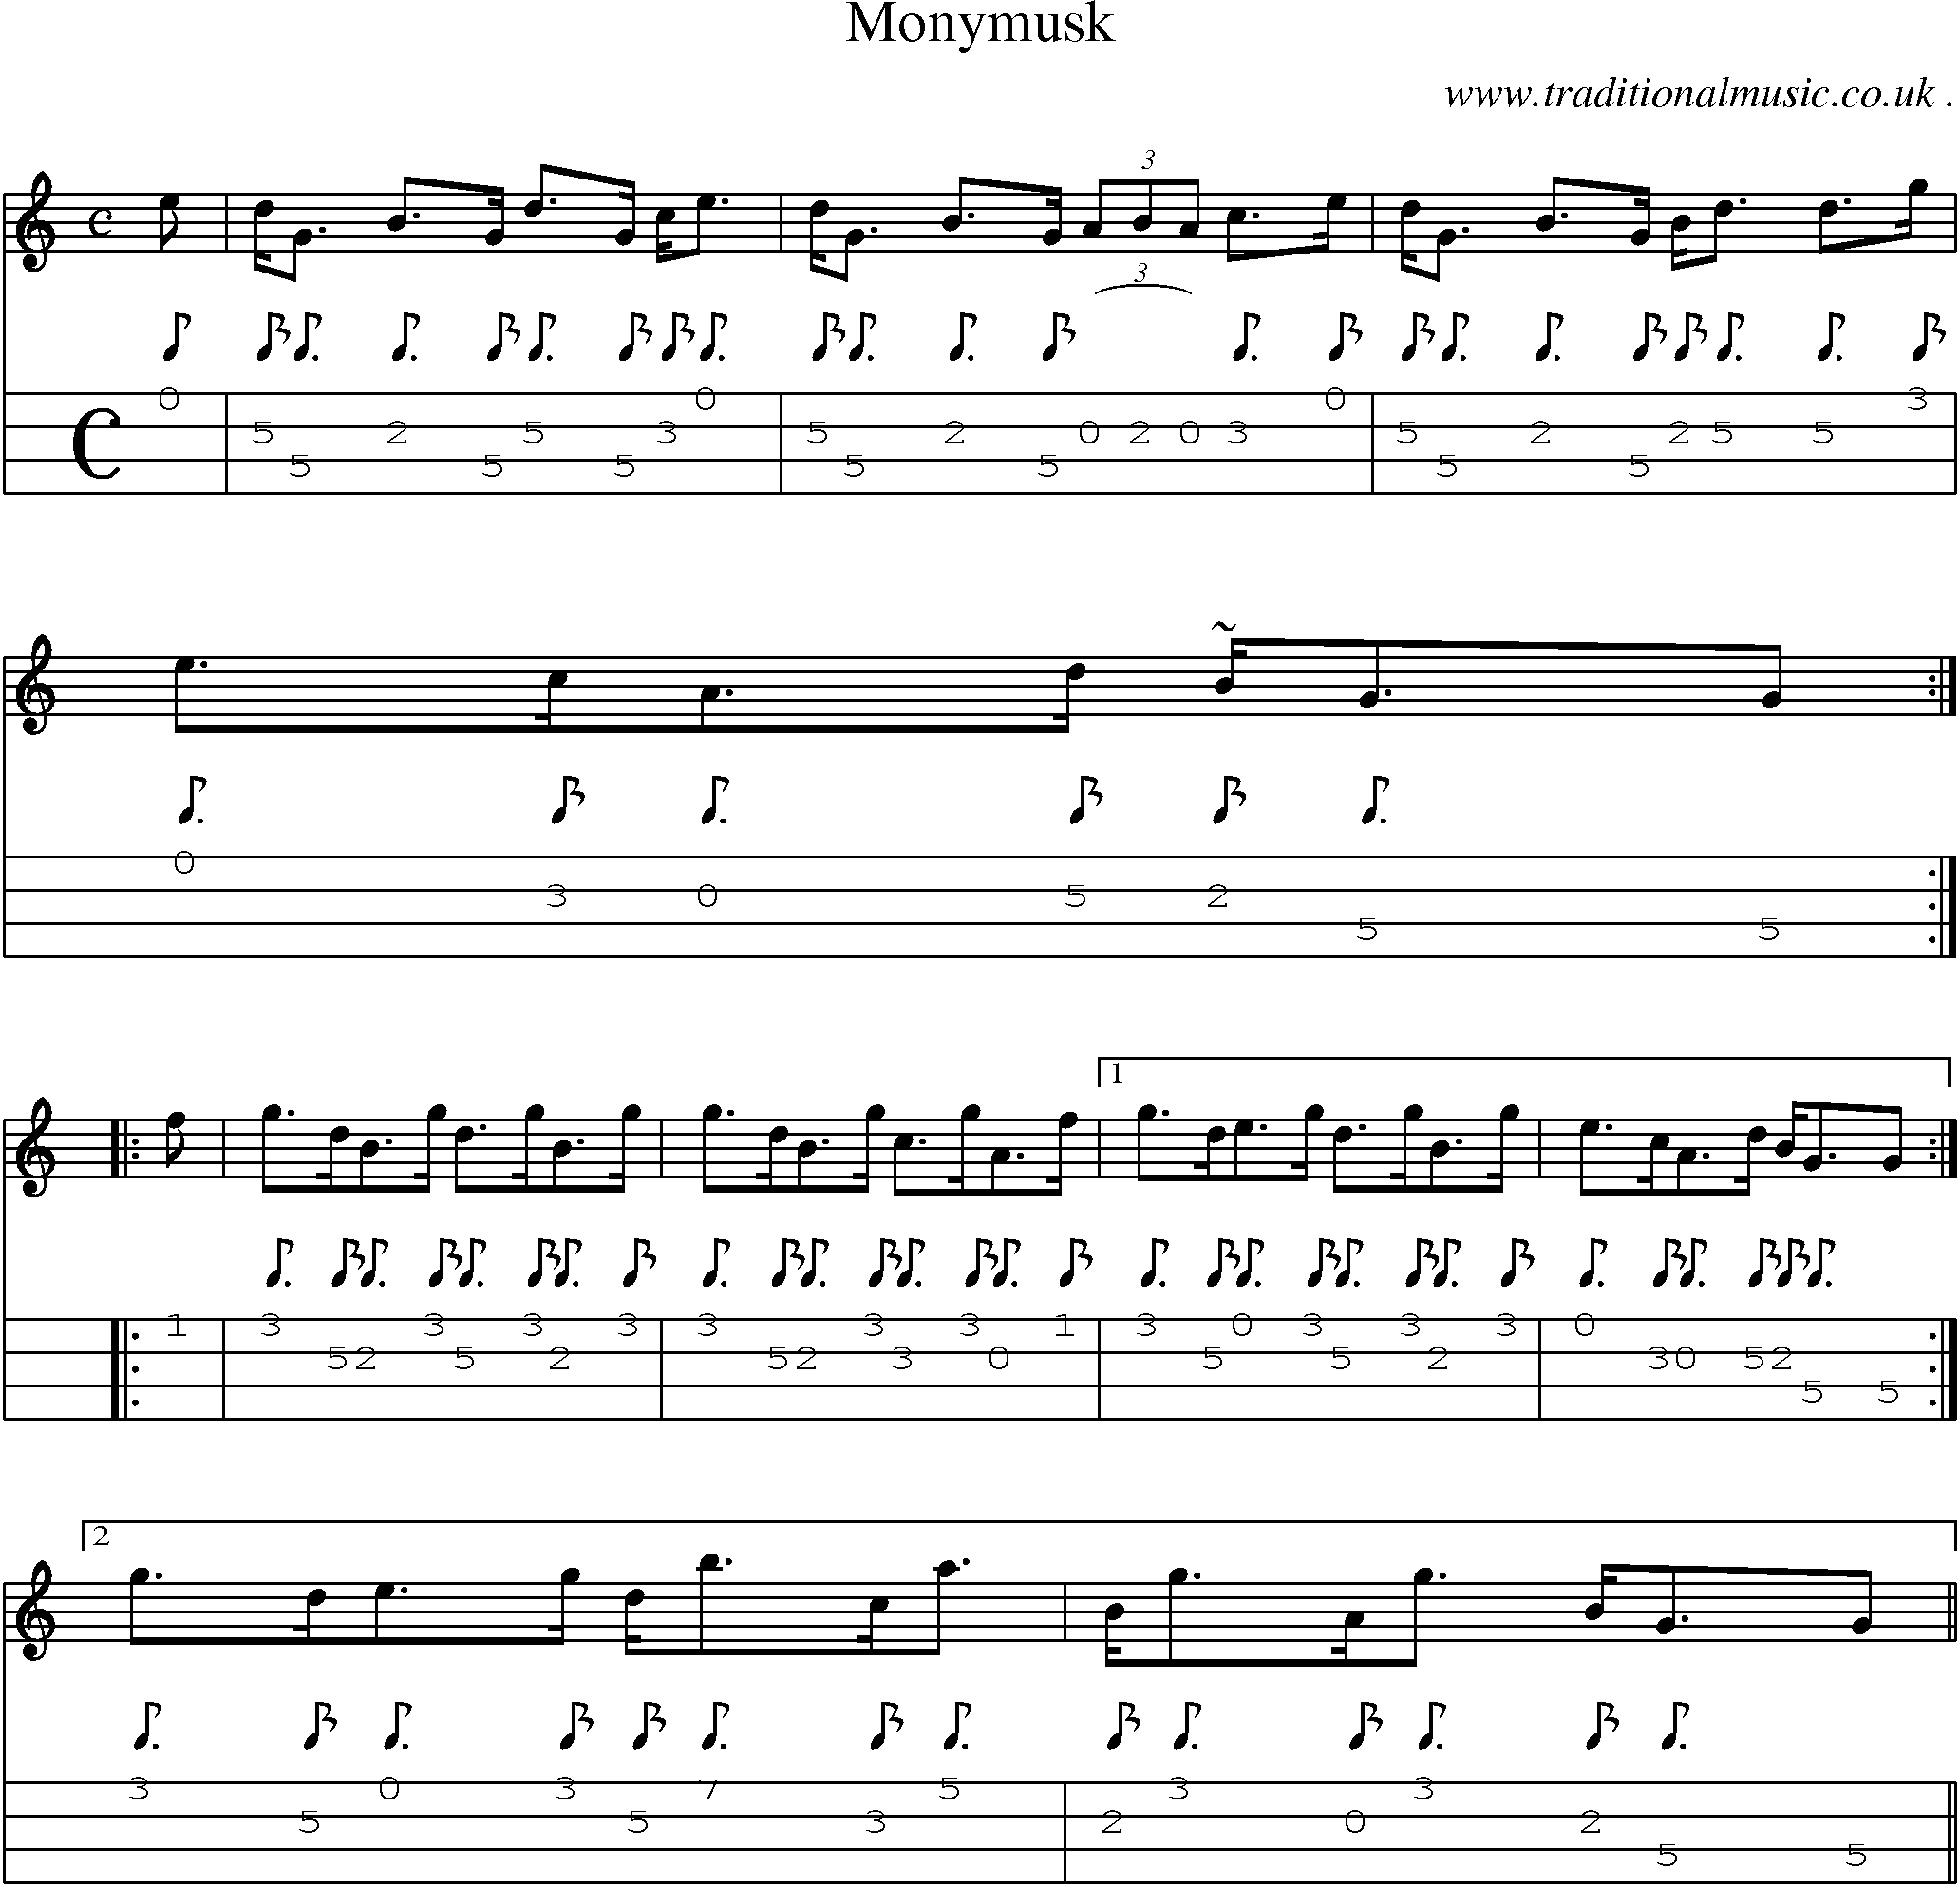 Sheet-music  score, Chords and Mandolin Tabs for Monymusk